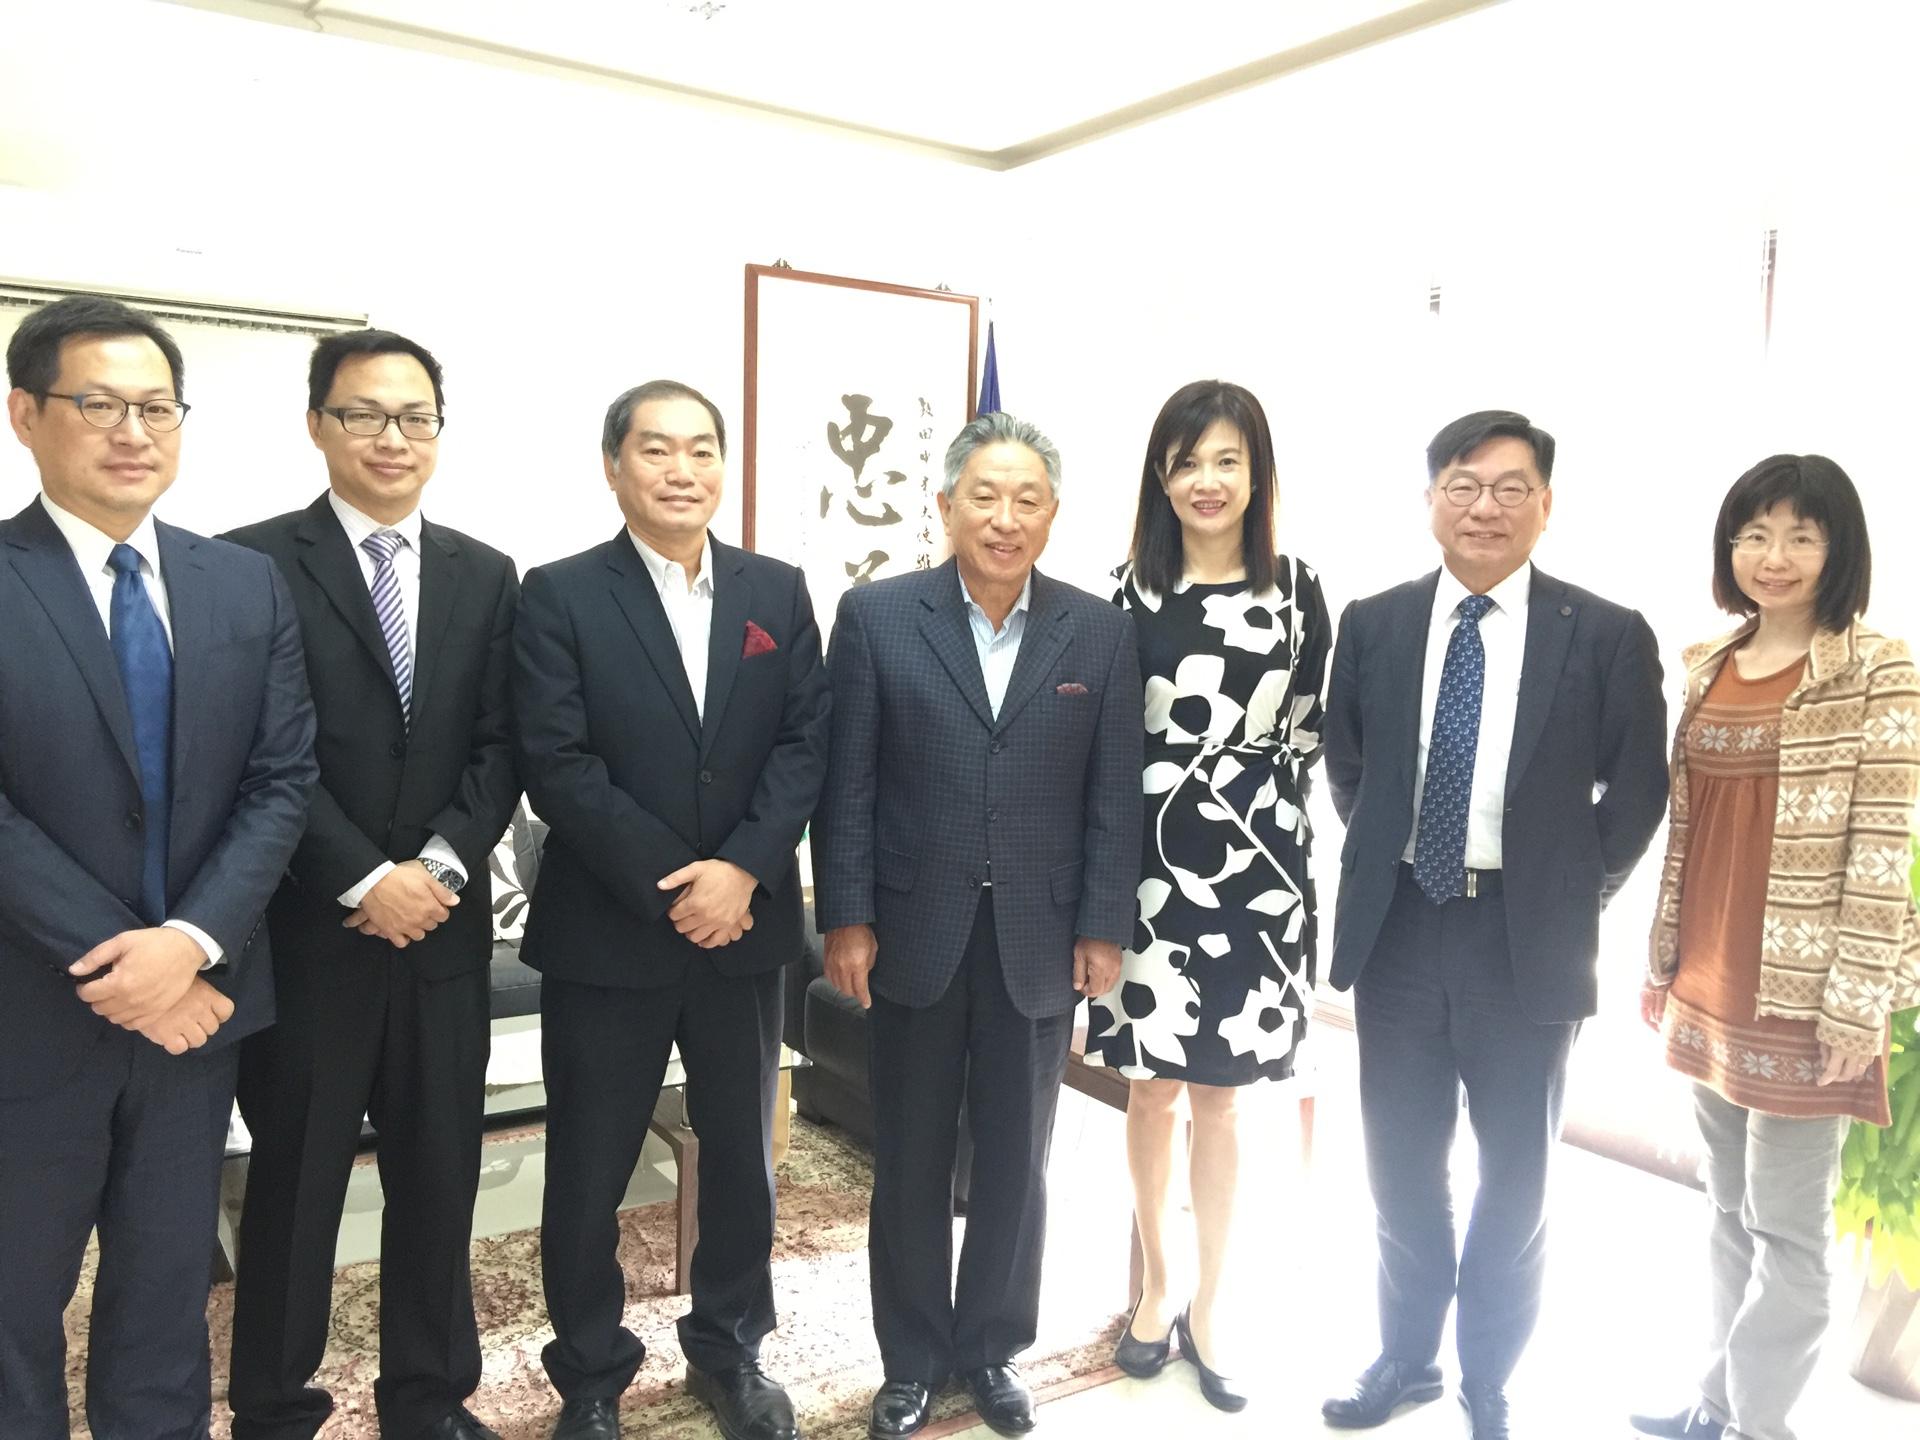 A delegation led by Tseng-Ju Hsu, Deputy Director General of the Hsinchu Science Park Bureau, and Chin-Yeong Hwang, Founder of Digitimes, visited New Delhi from 4th to 9th February, 2018 to look for cooperation opportunities with Indian smartphone industry and startup companies. The delegation called on Amb. Tien at Taipei Economic and Cultural Center in India(TECC) on the 5th of February, to share views on cooperation of hi-tech industries between Taiwan and India.